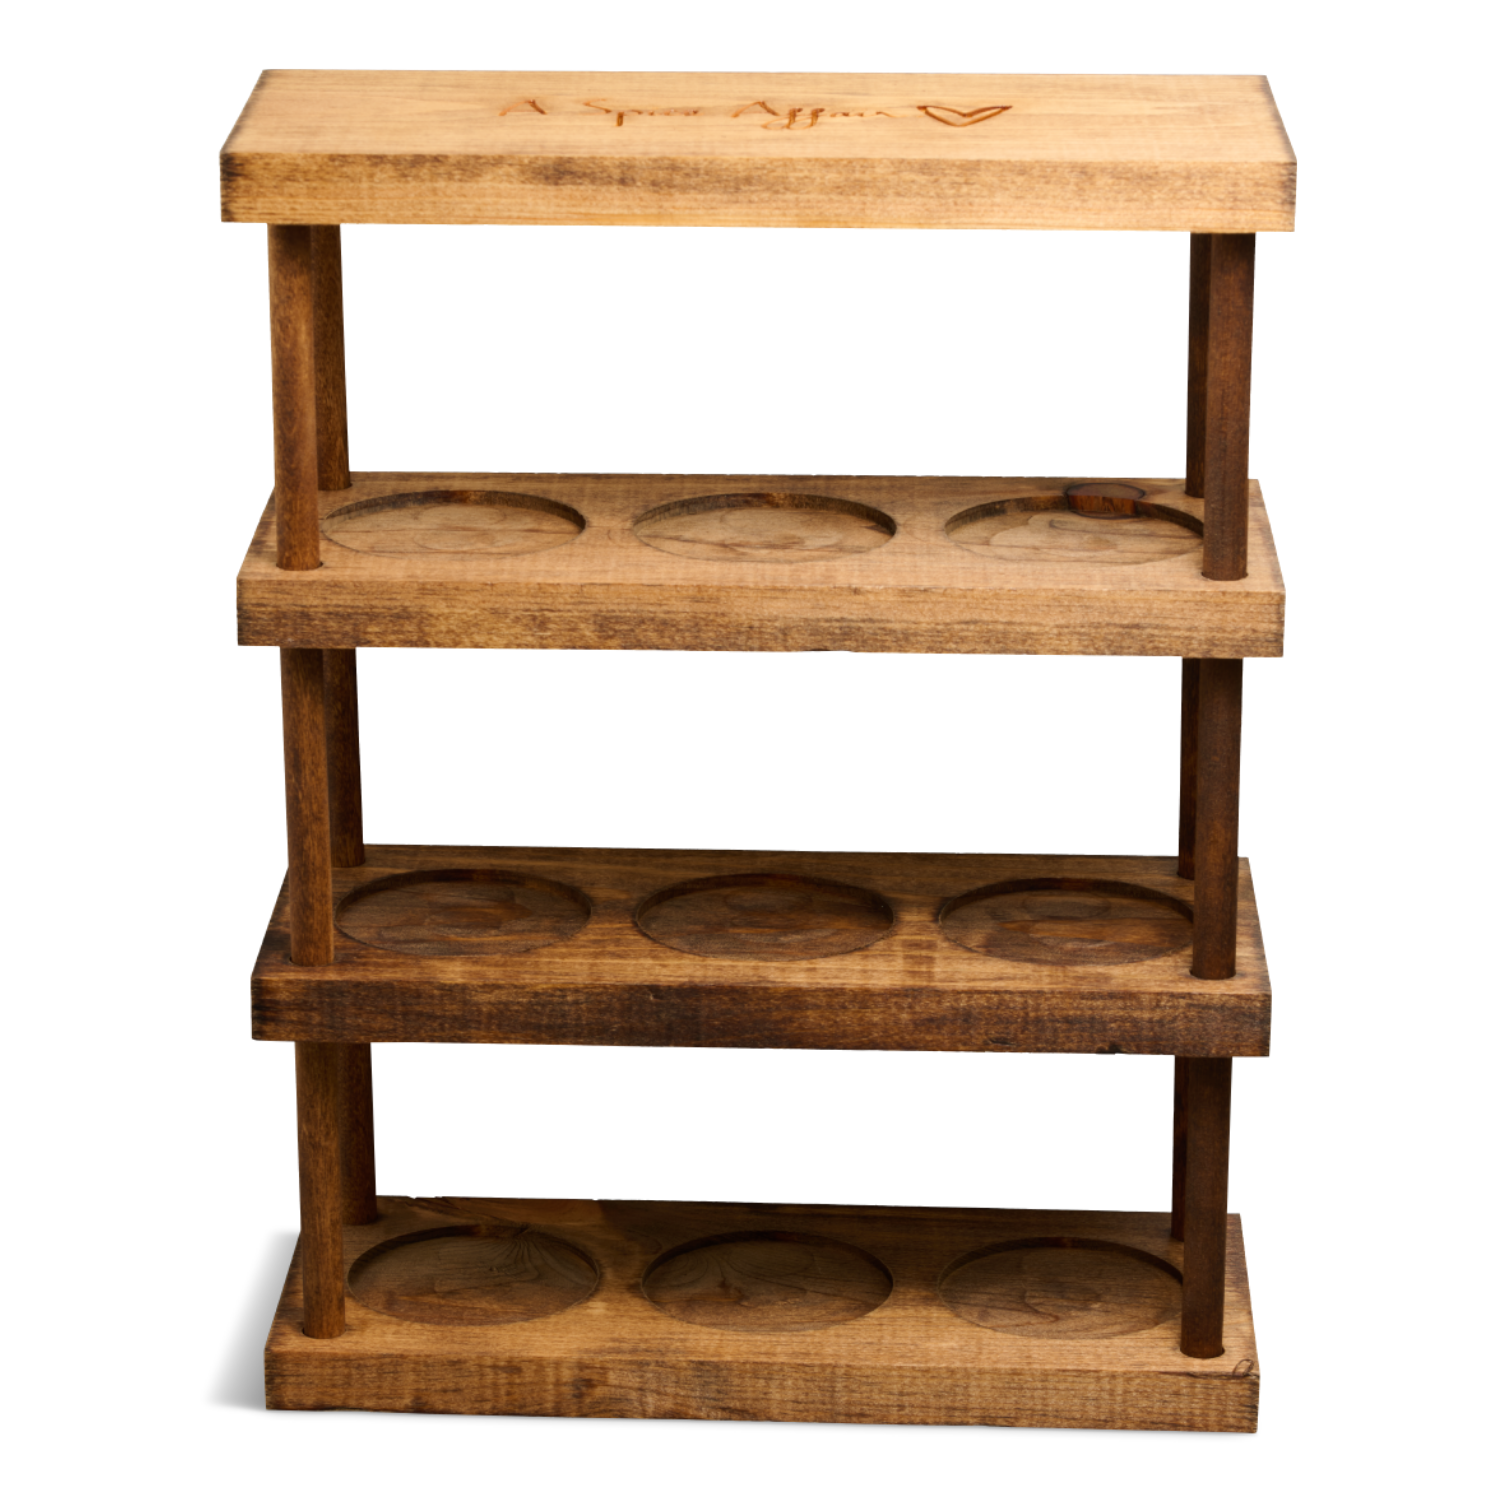 Pine Spice Rack  Unfinished Wood Spice Rack